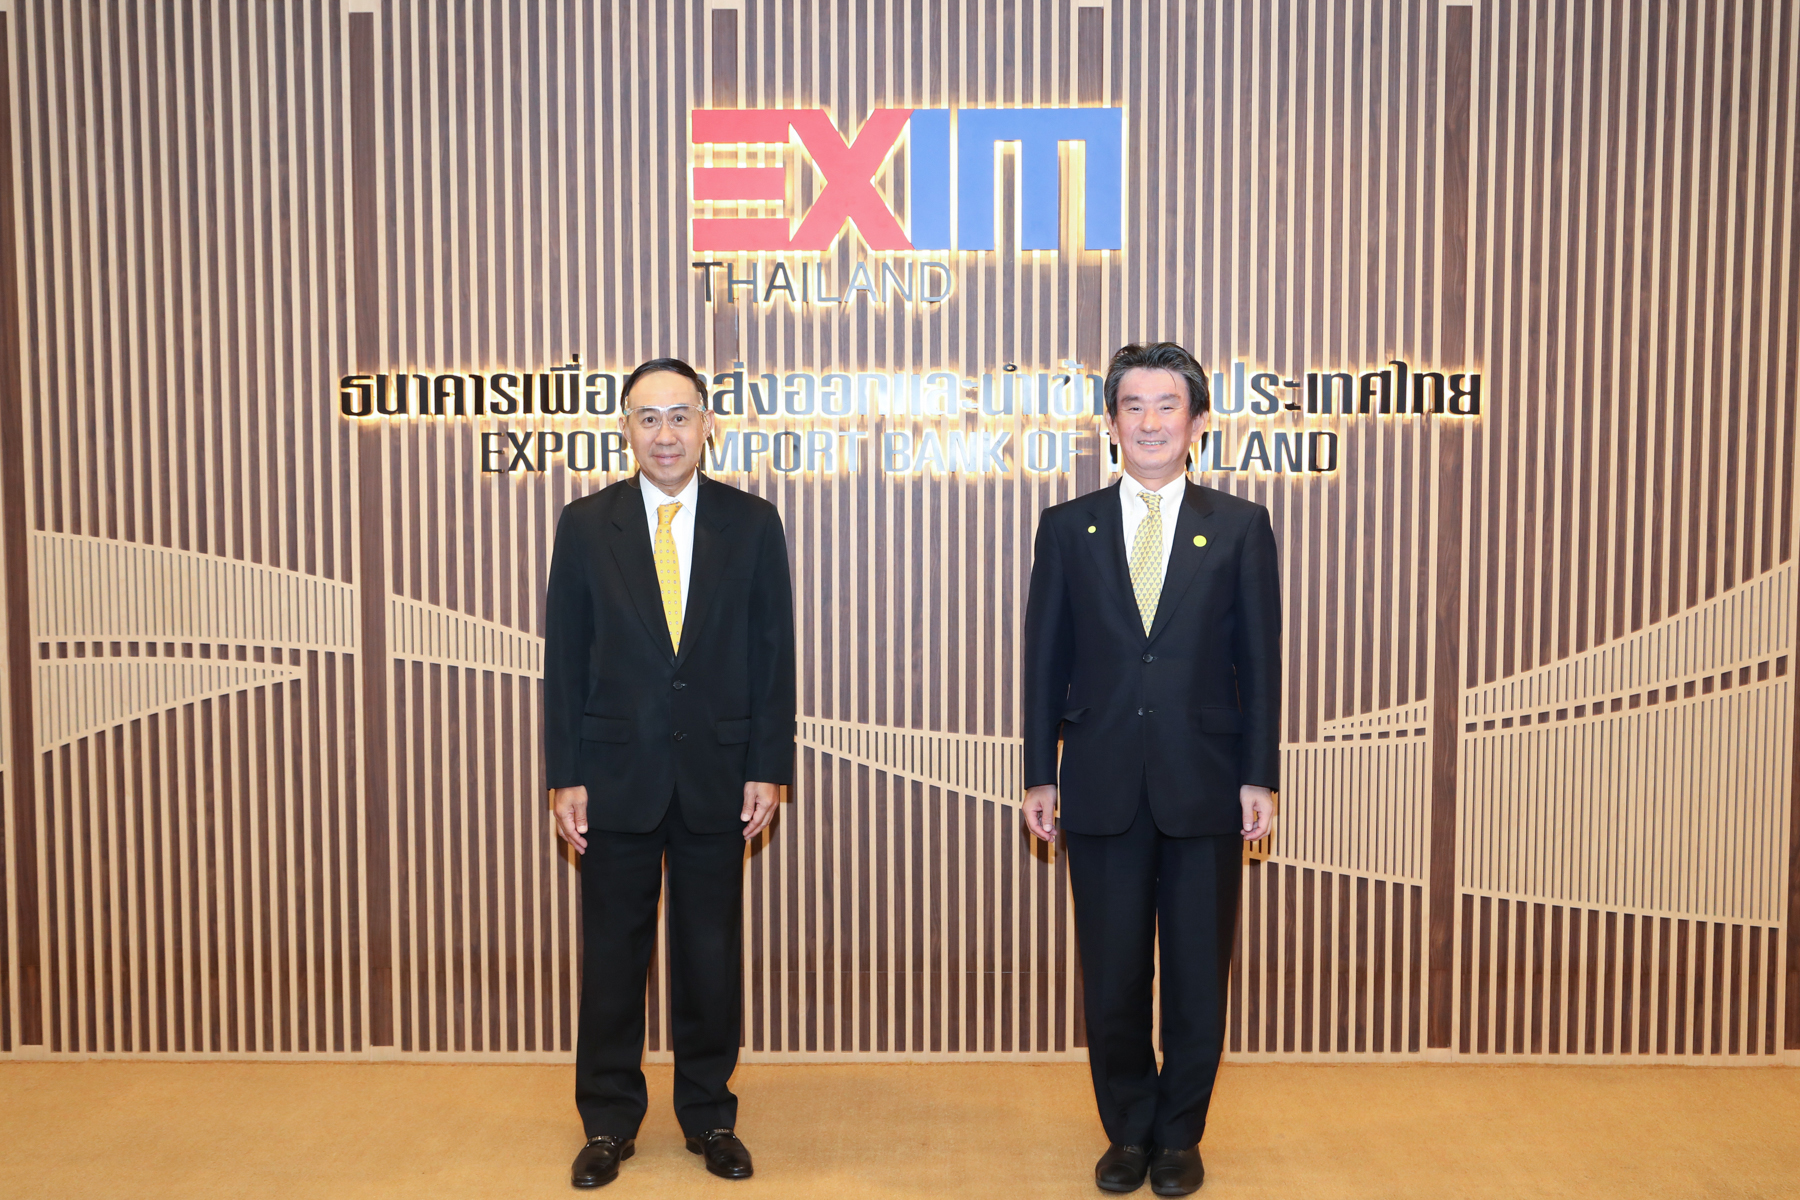 EXIM Thailand and JETRO Bangkok Meet to Discuss  Support for Thai-Japanese Trade and Investment